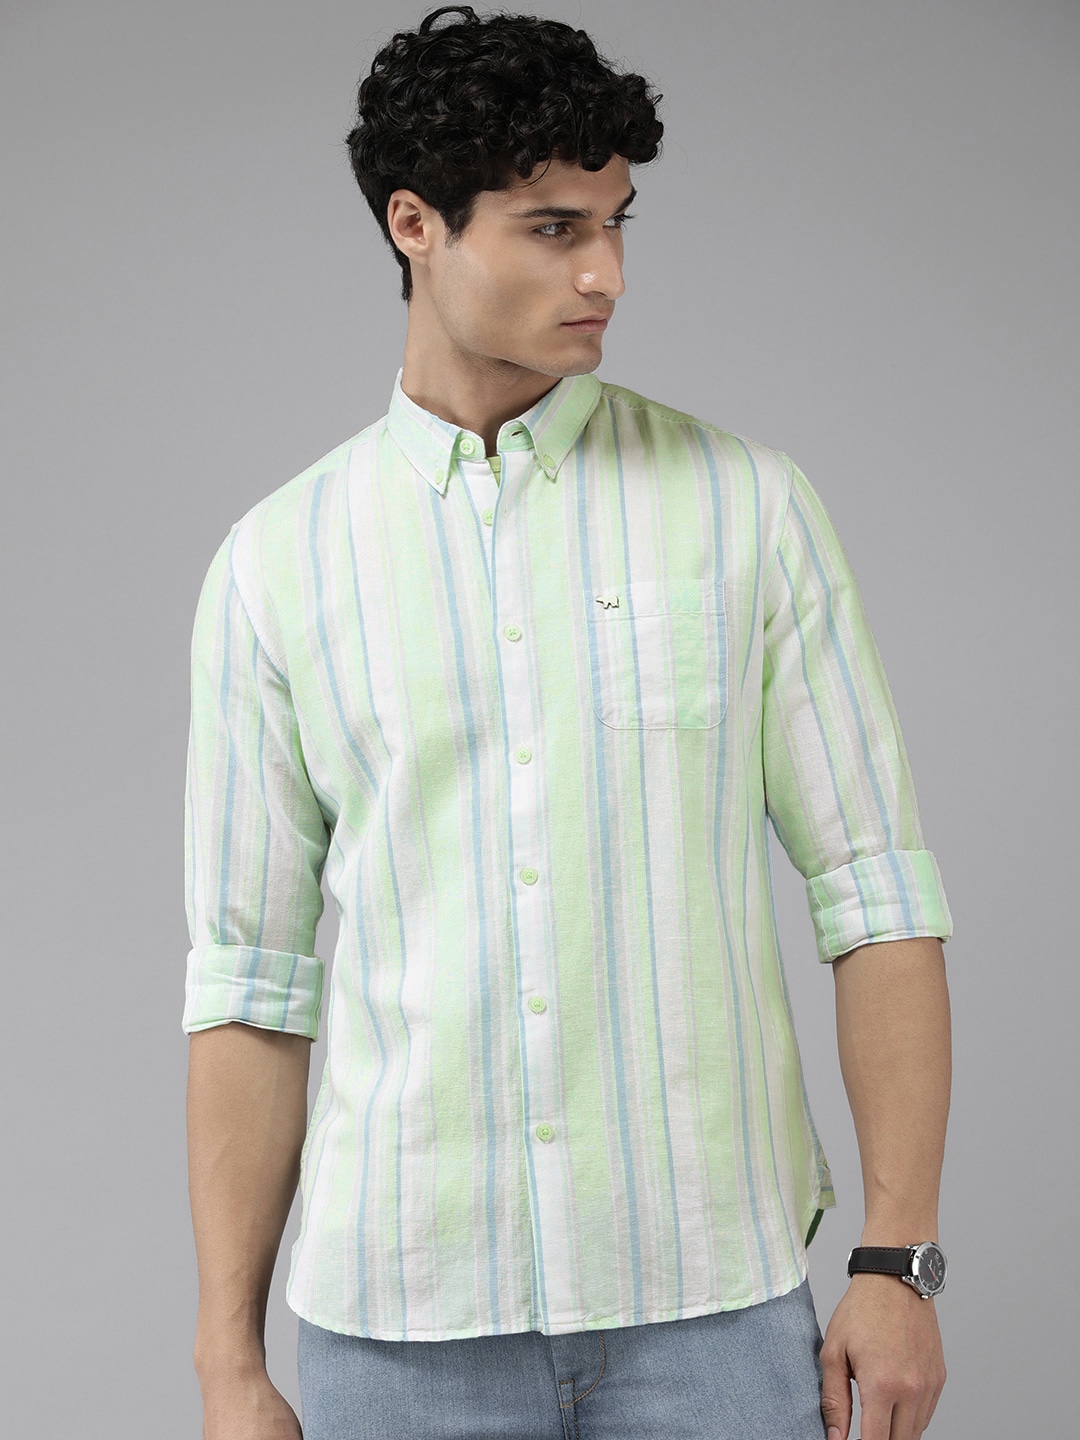 THE BEAR HOUSE Slim Fit Striped Casual Shirt